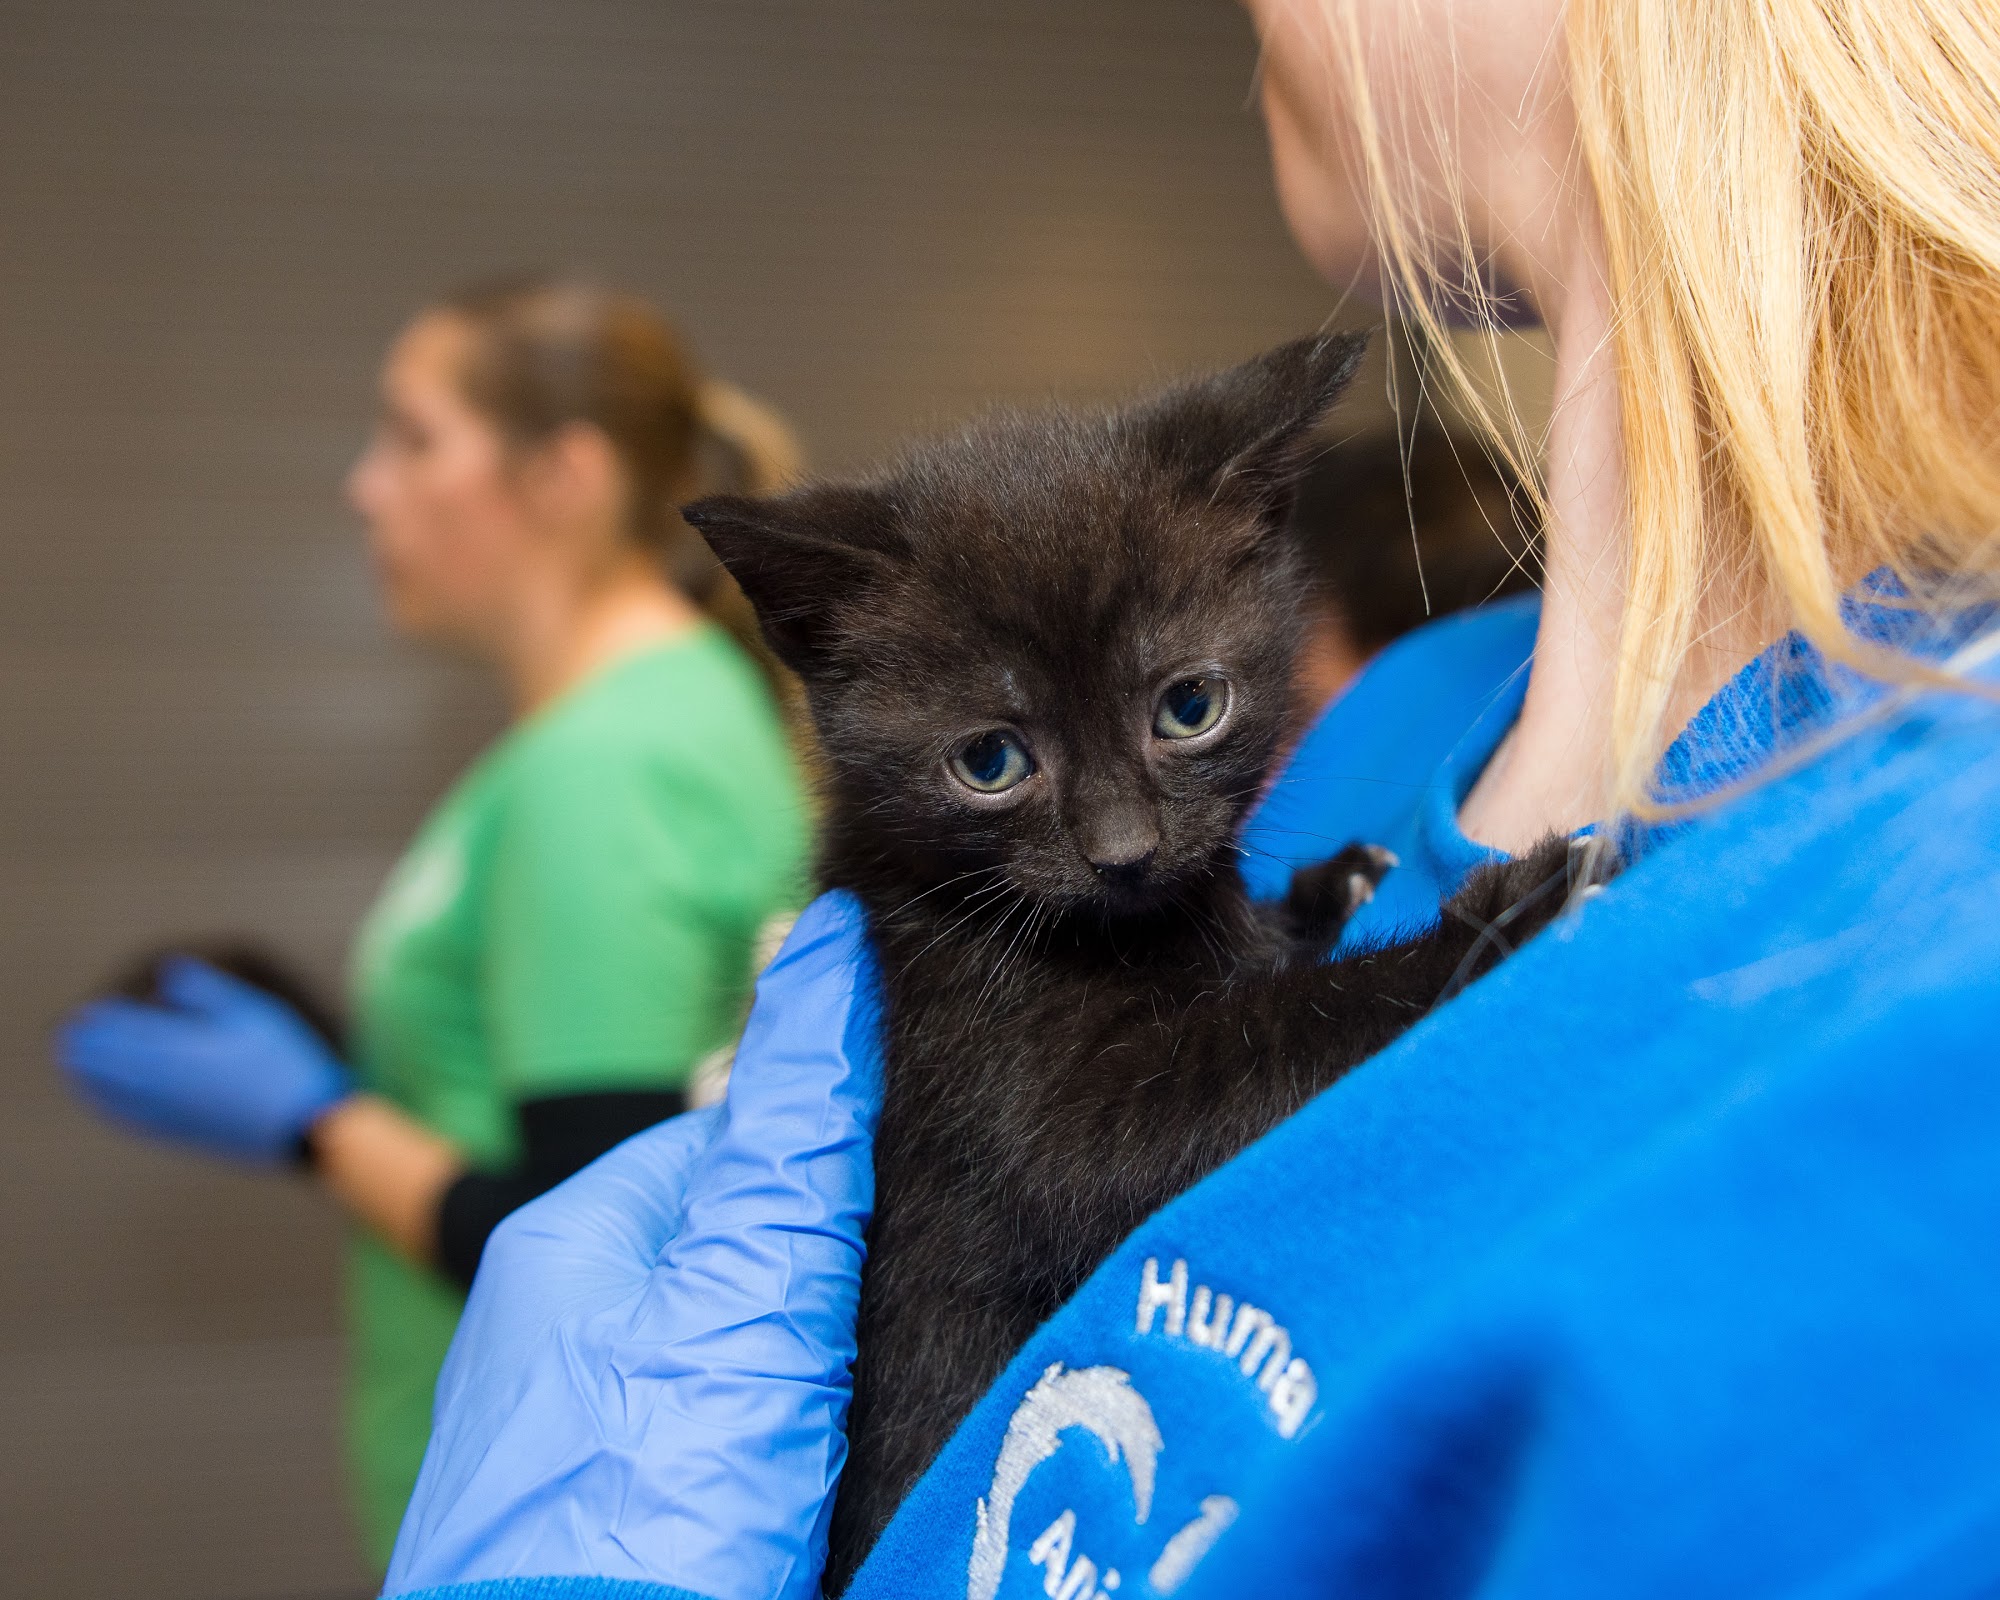 Humane Animal Rescue of Pittsburgh